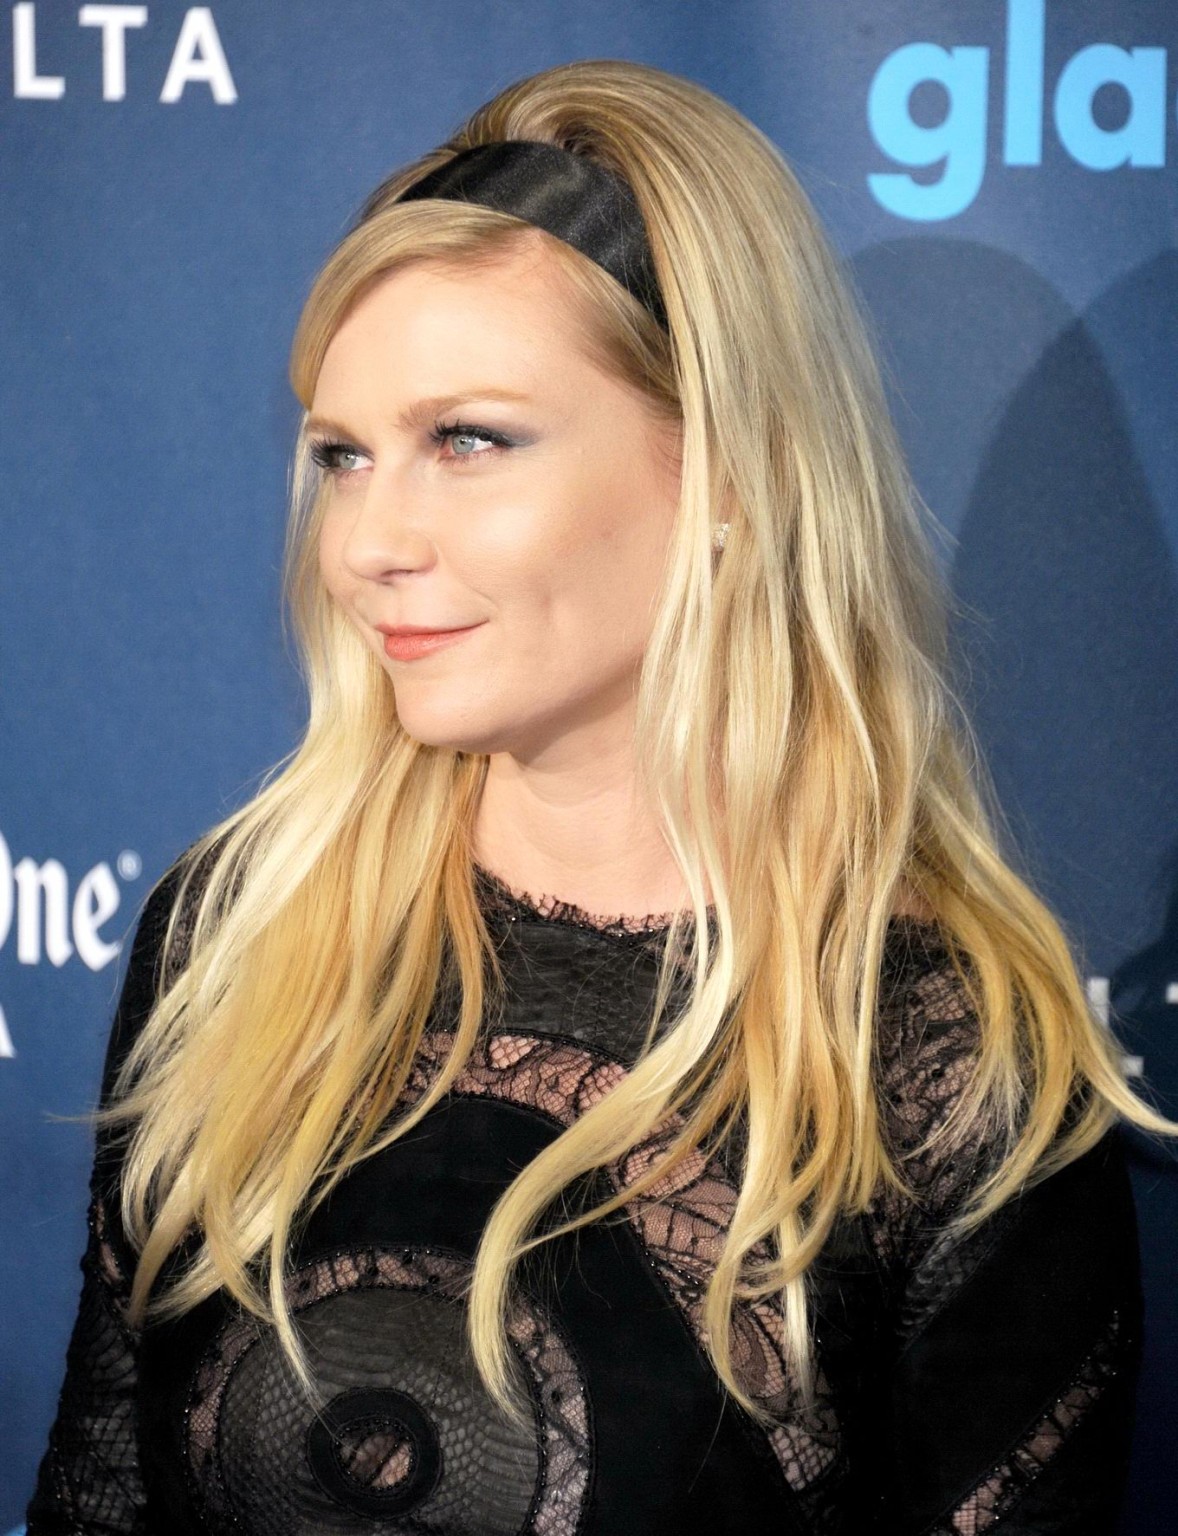 Kirsten Dunst wearing a partially see through little dress at the 24th Annual GL